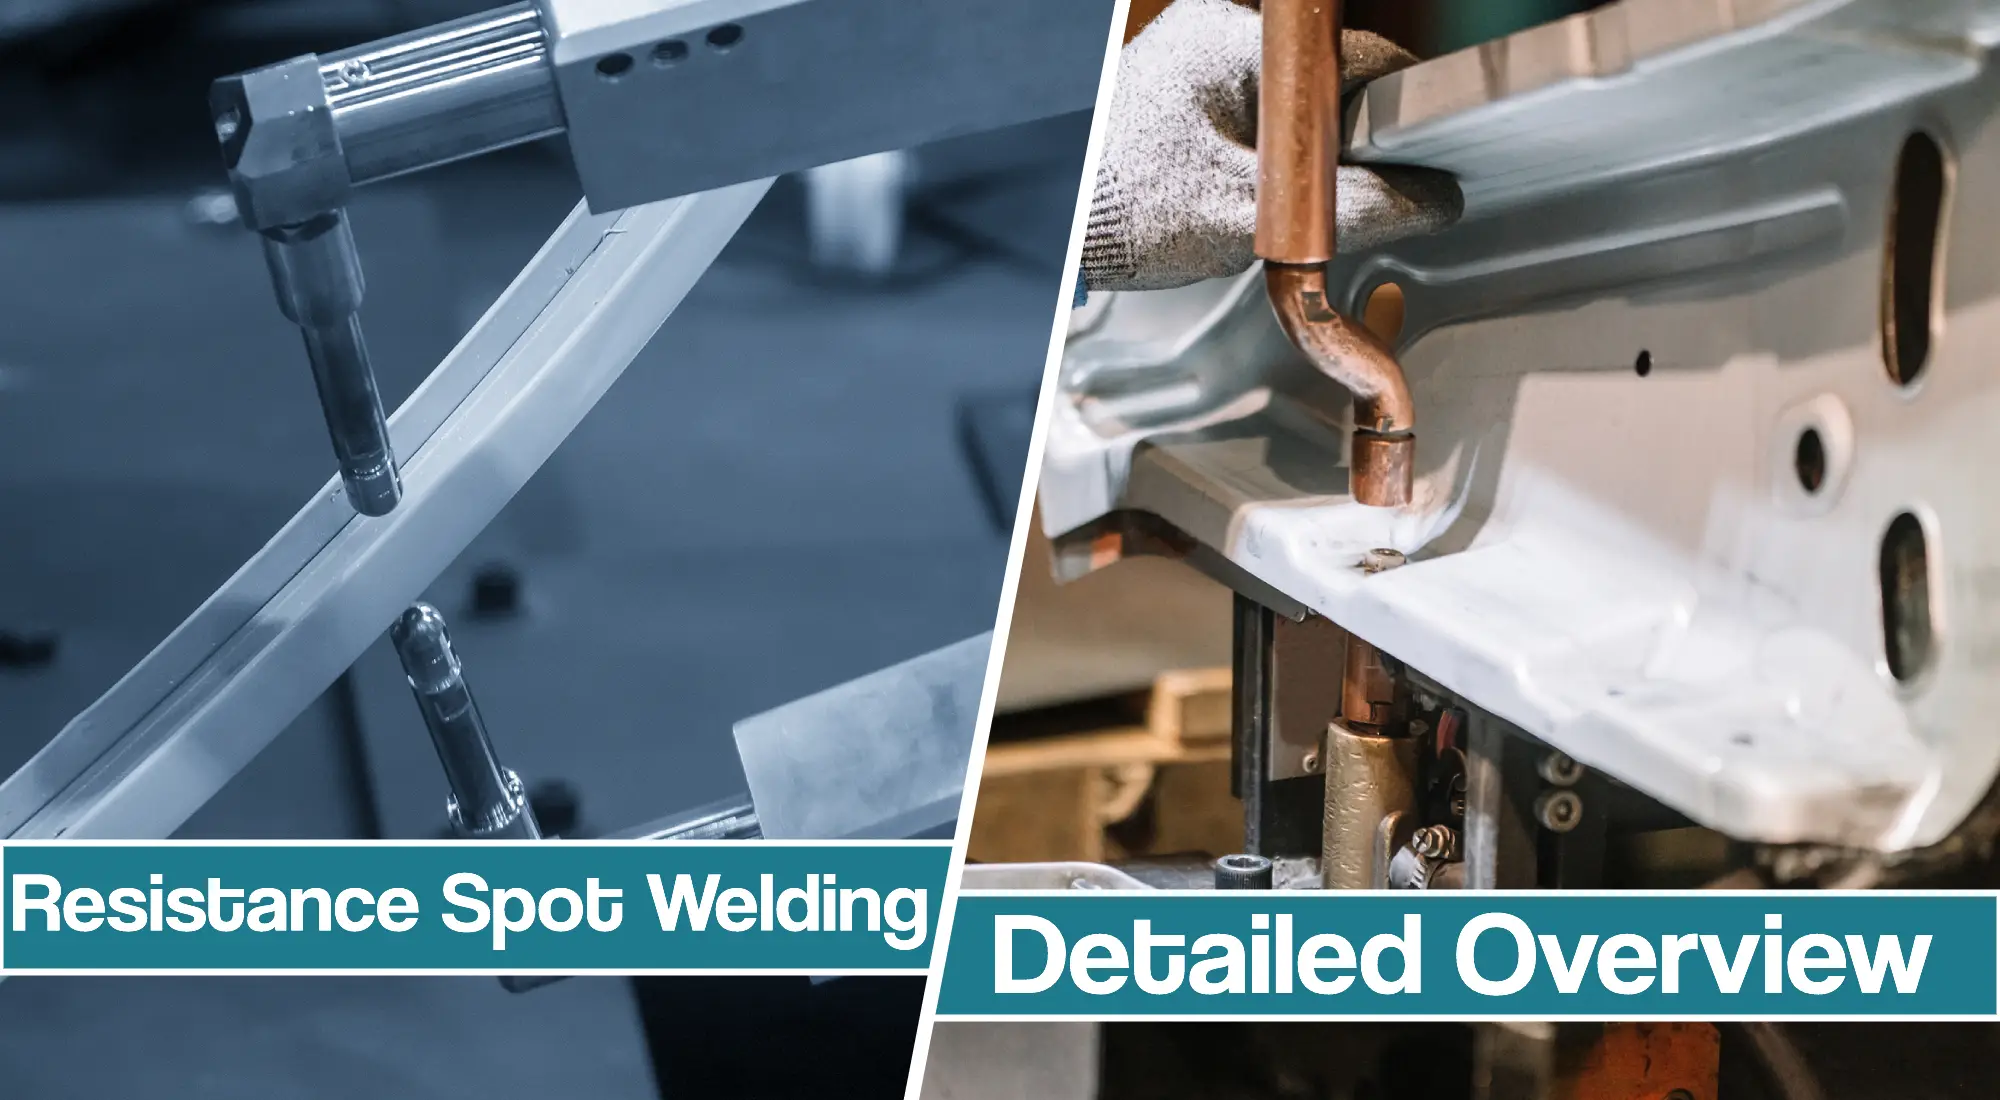 Spot welding and Applications of resistance welding process